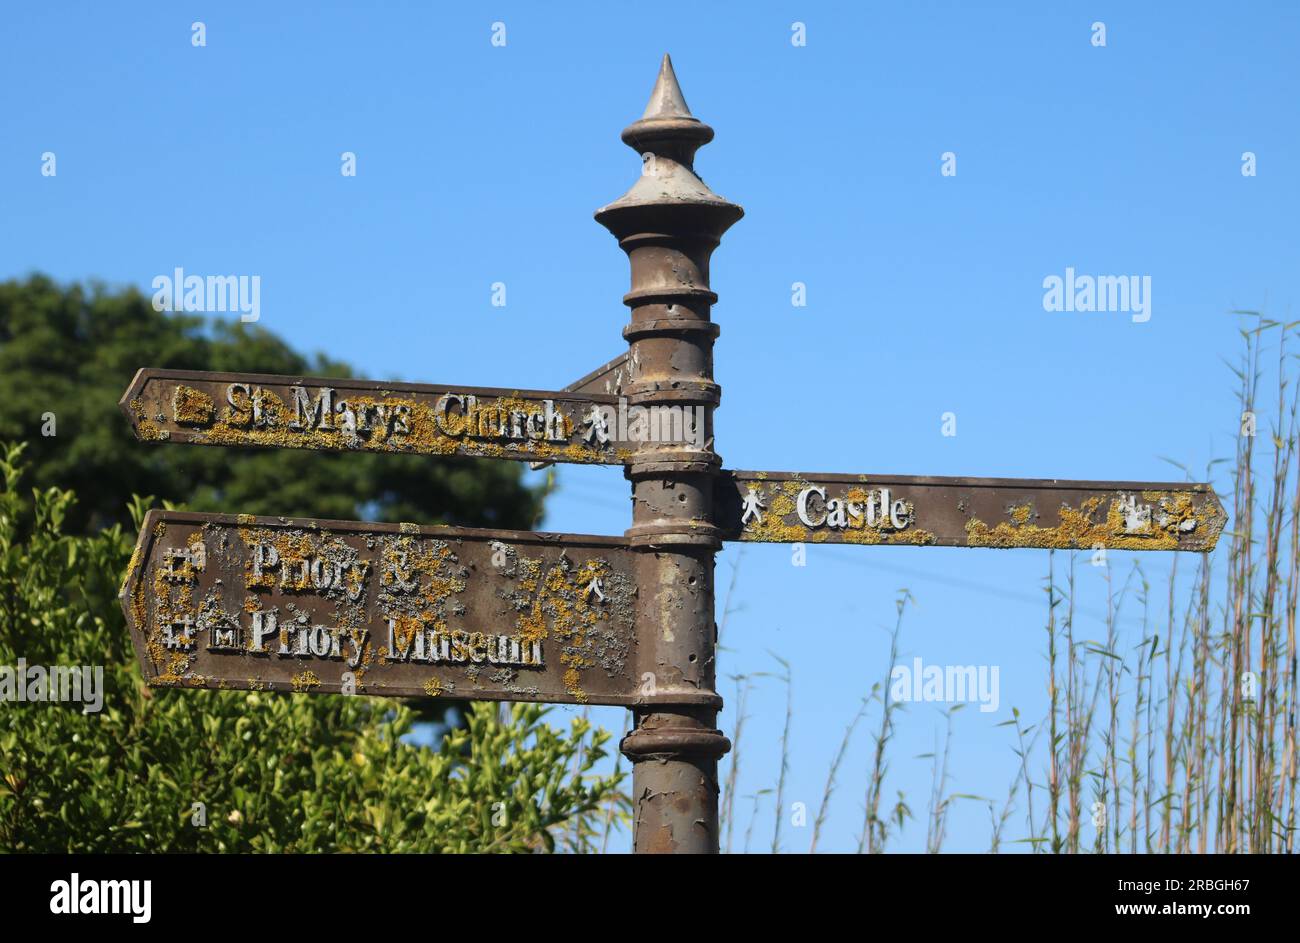 Old weathered fingerpost type sign post, Lindisfarne giving direction of local places of interest, Priory Museum, Priory, St Marys Church and Castle. Stock Photo